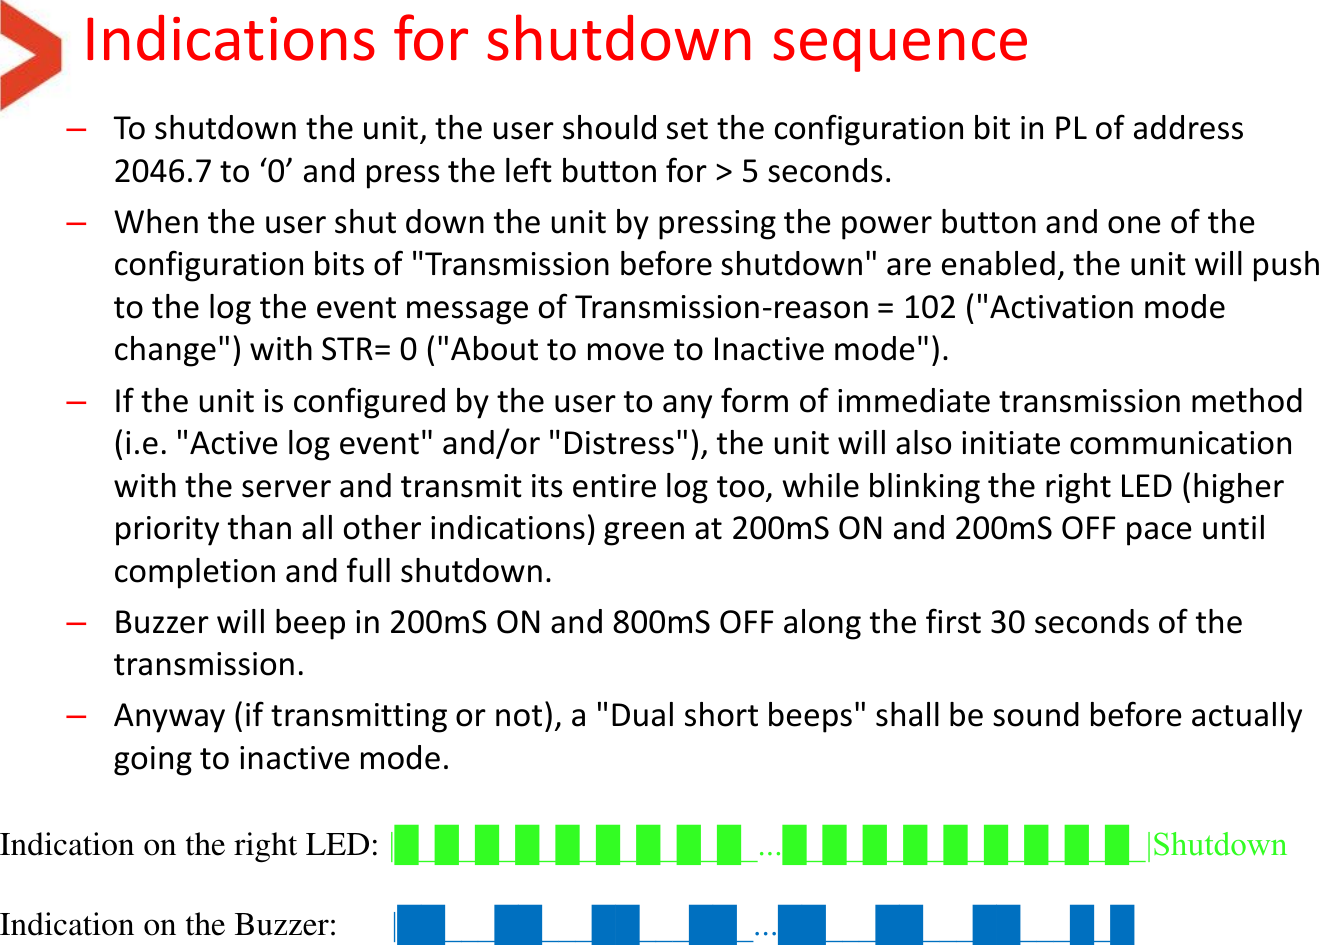 Indications for shutdown sequence –To shutdown the unit, the user should set the configuration bit in PL of address 2046.7 to ‘0’ and press the left button for &gt; 5 seconds. –When the user shut down the unit by pressing the power button and one of the configuration bits of &quot;Transmission before shutdown&quot; are enabled, the unit will push to the log the event message of Transmission-reason = 102 (&quot;Activation mode change&quot;) with STR= 0 (&quot;About to move to Inactive mode&quot;). –If the unit is configured by the user to any form of immediate transmission method (i.e. &quot;Active log event&quot; and/or &quot;Distress&quot;), the unit will also initiate communication with the server and transmit its entire log too, while blinking the right LED (higher priority than all other indications) green at 200mS ON and 200mS OFF pace until completion and full shutdown. –Buzzer will beep in 200mS ON and 800mS OFF along the first 30 seconds of the transmission. –Anyway (if transmitting or not), a &quot;Dual short beeps&quot; shall be sound before actually going to inactive mode.     Indication on the right LED: |█_█_█_█_█_█_█_█_█_...█_█_█_█_█_█_█_█_█_|Shutdown   Indication on the Buzzer:     |██___██___██___██_...██___██___██___█_█   